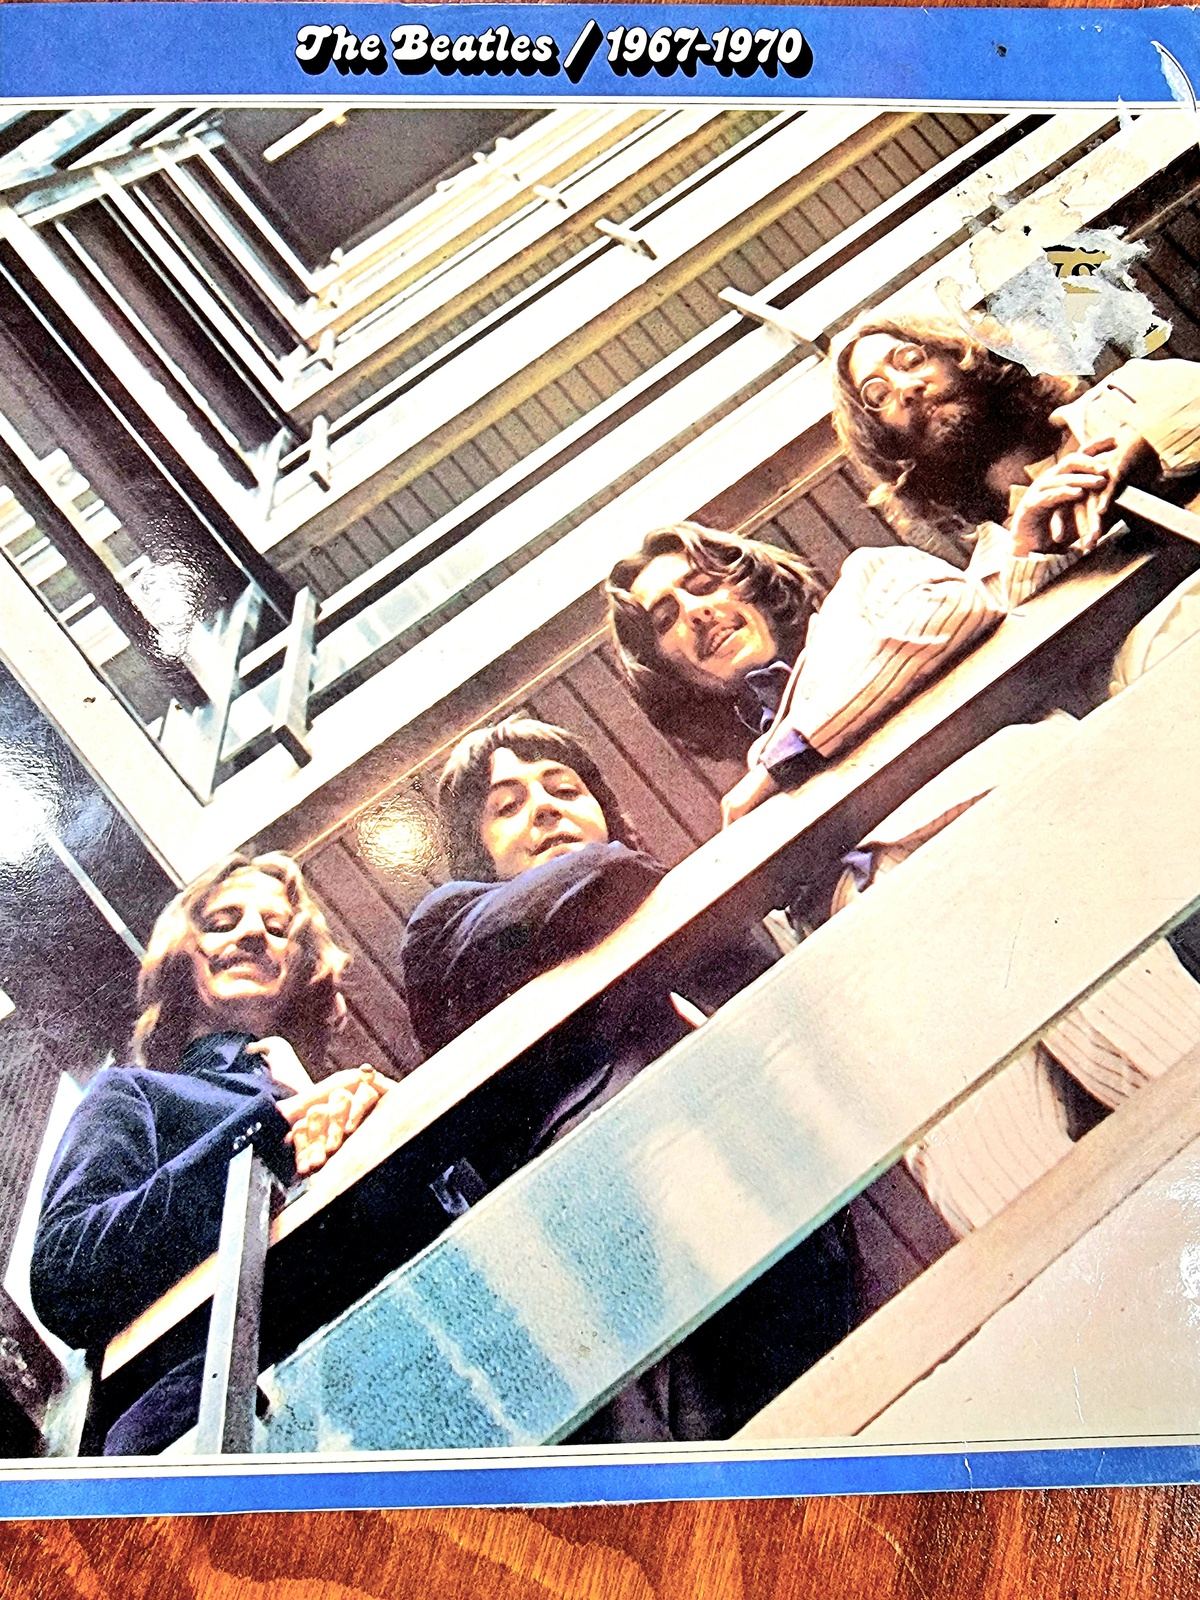 The Beatles / 1967 to 1970